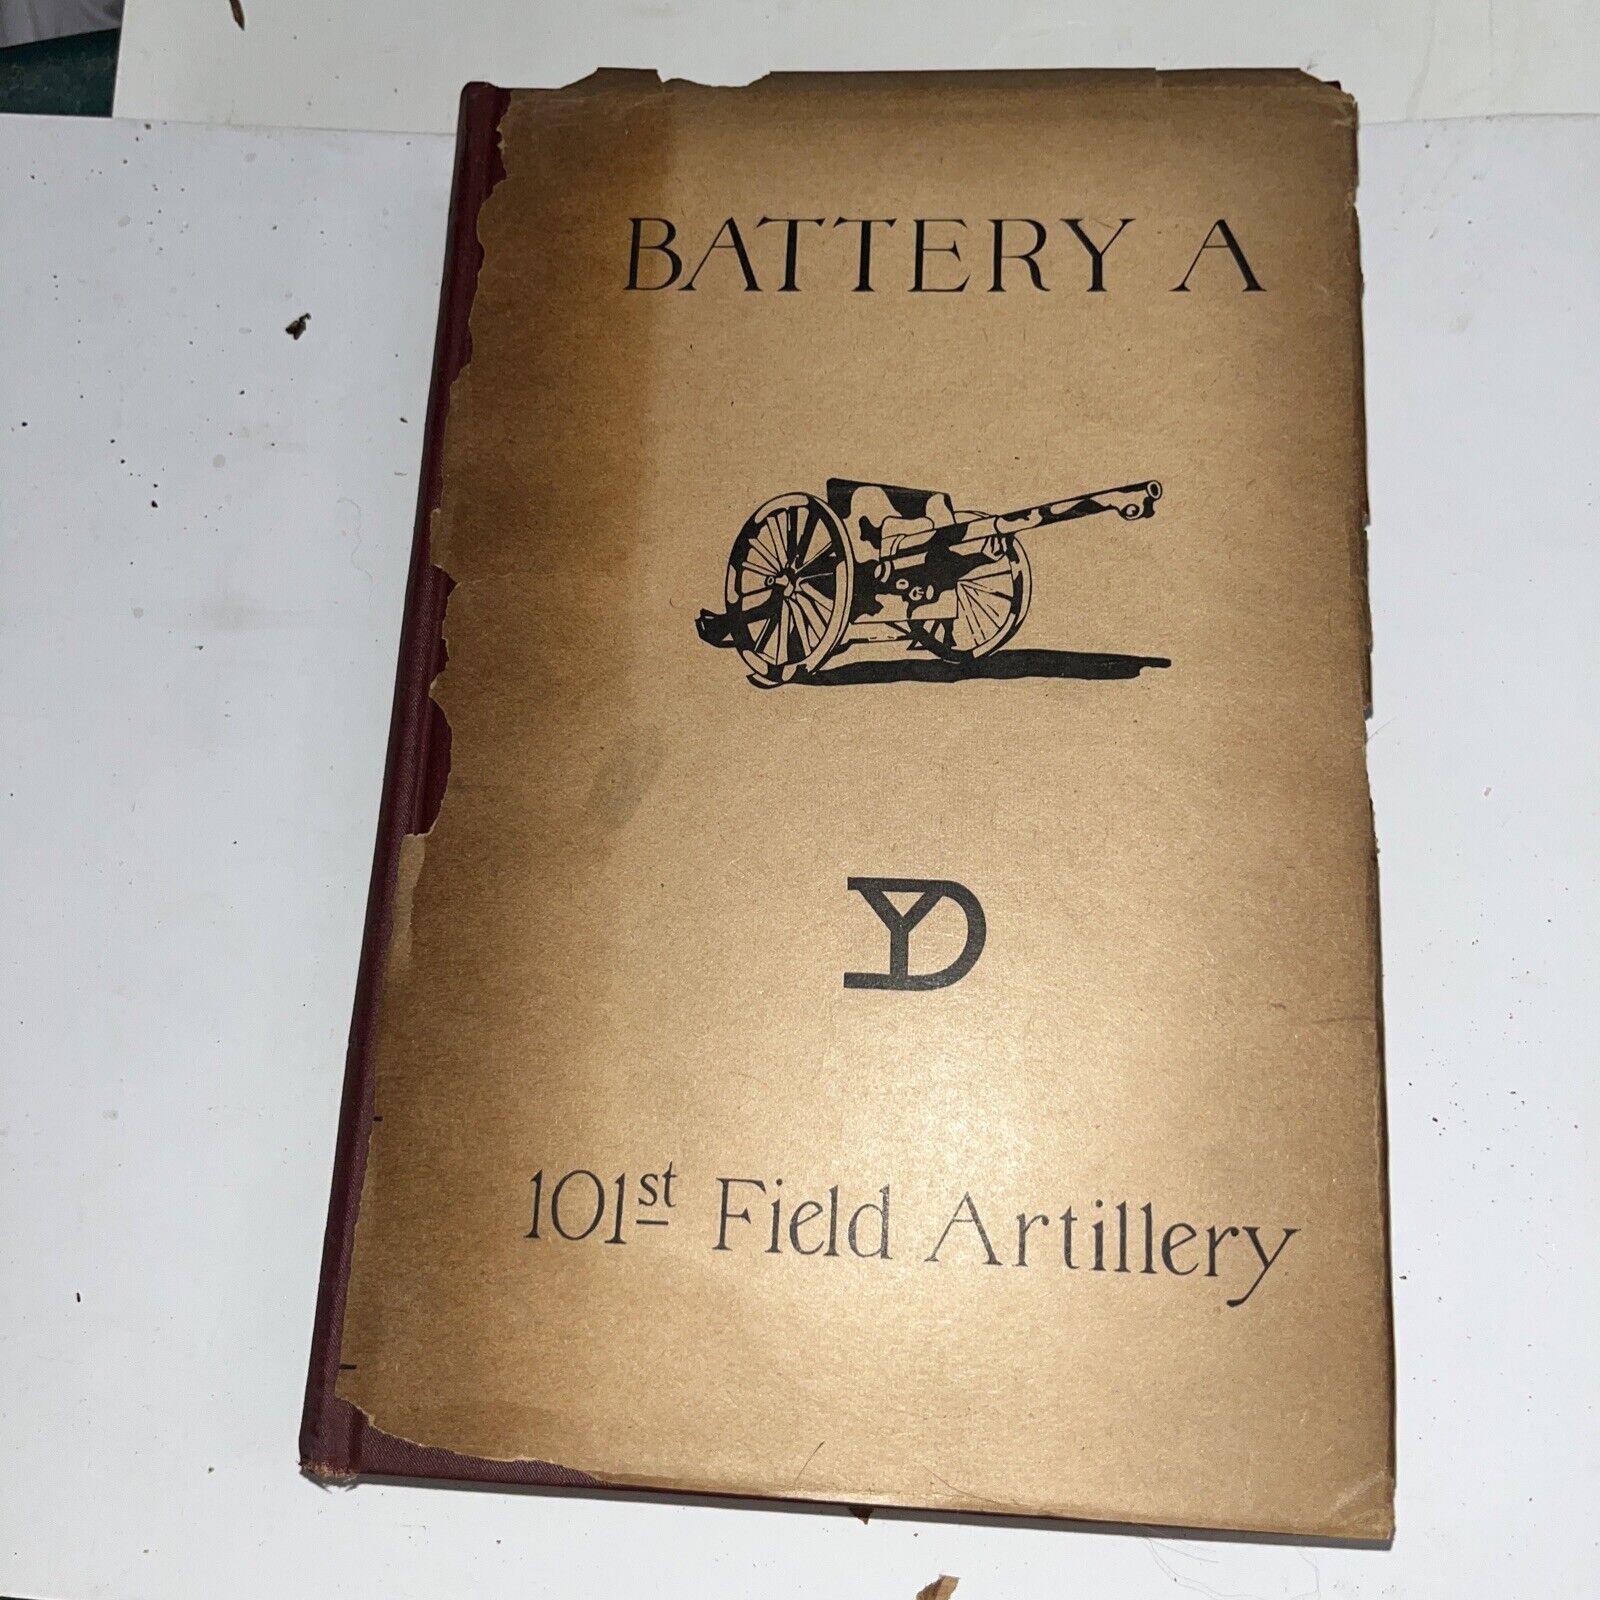 Antique 1919 WWI narrative BATTERY A Of Boston 101st FIELD ARTILLERY Illustrated